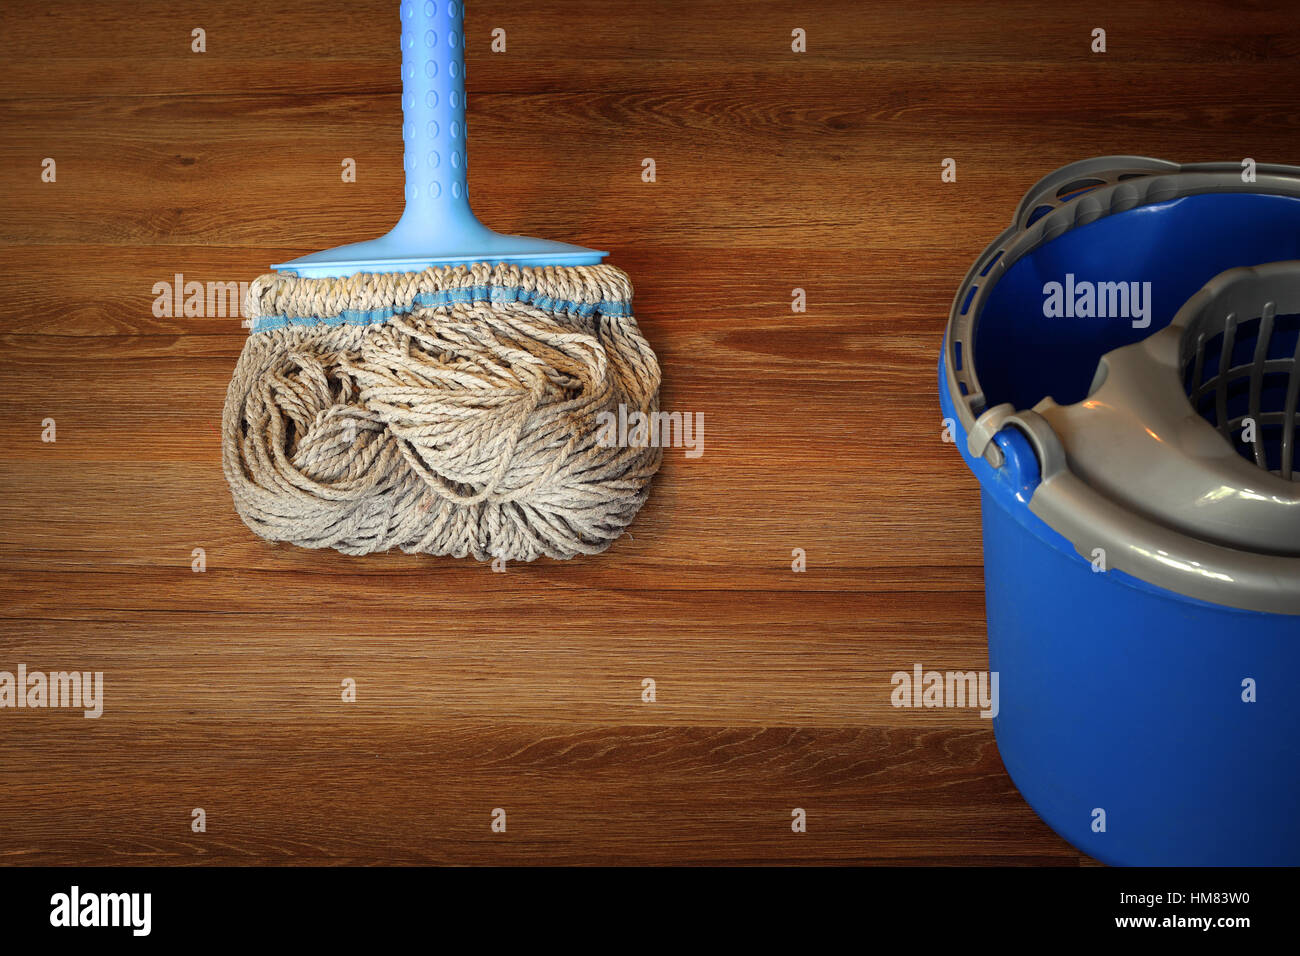 https://c8.alamy.com/comp/HM83W0/cleaning-equipment-on-wooden-floor-mop-and-blue-bucket-HM83W0.jpg